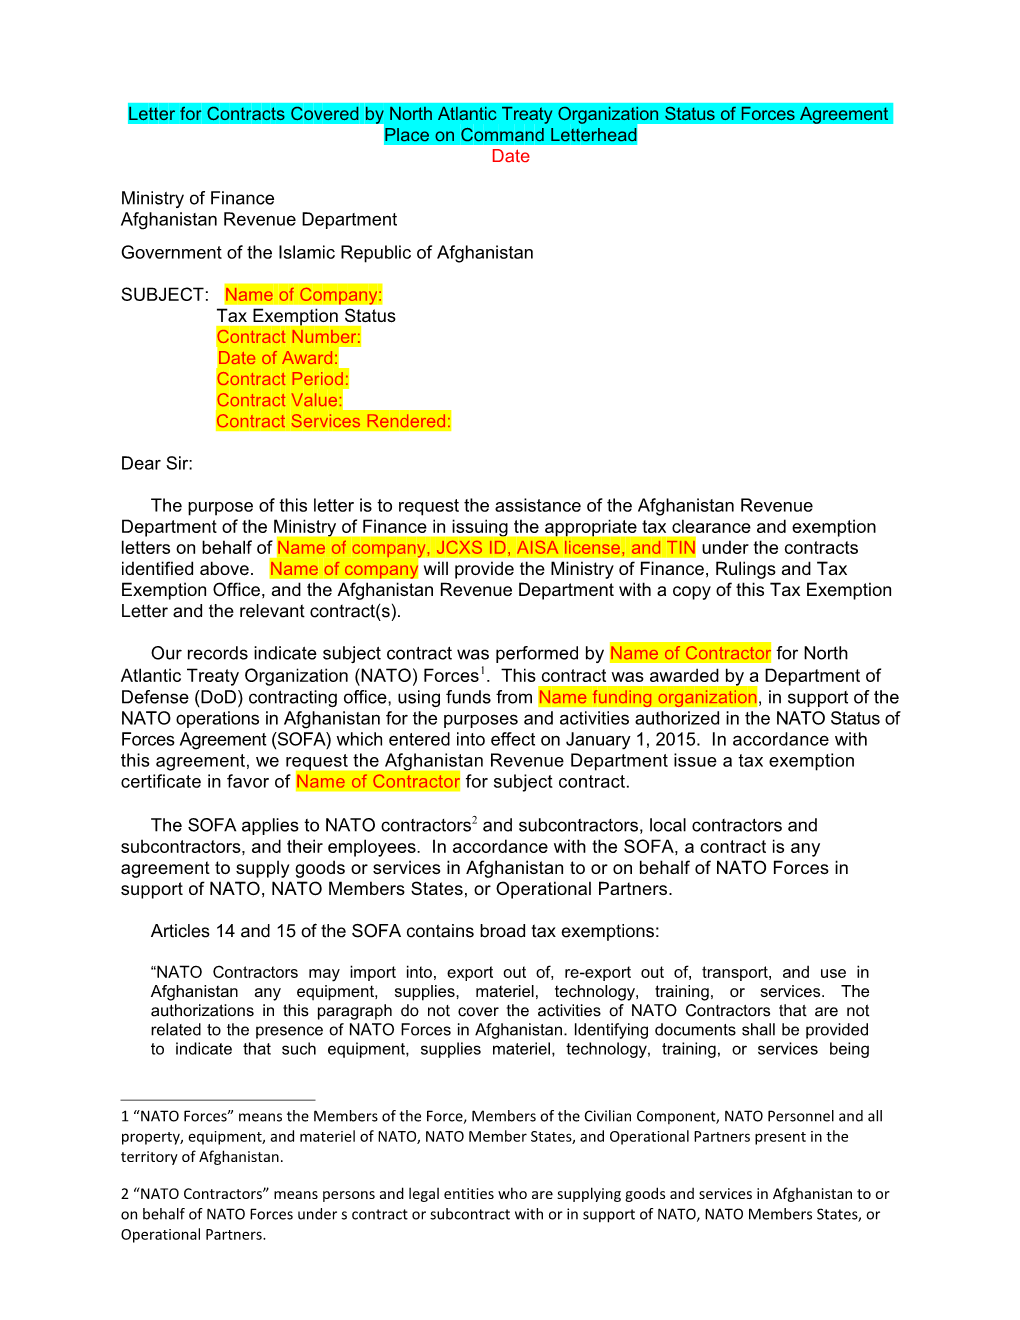 Letter Forcontracts Coveredby North Atlantic Treaty Organization Status of Forces Agreement